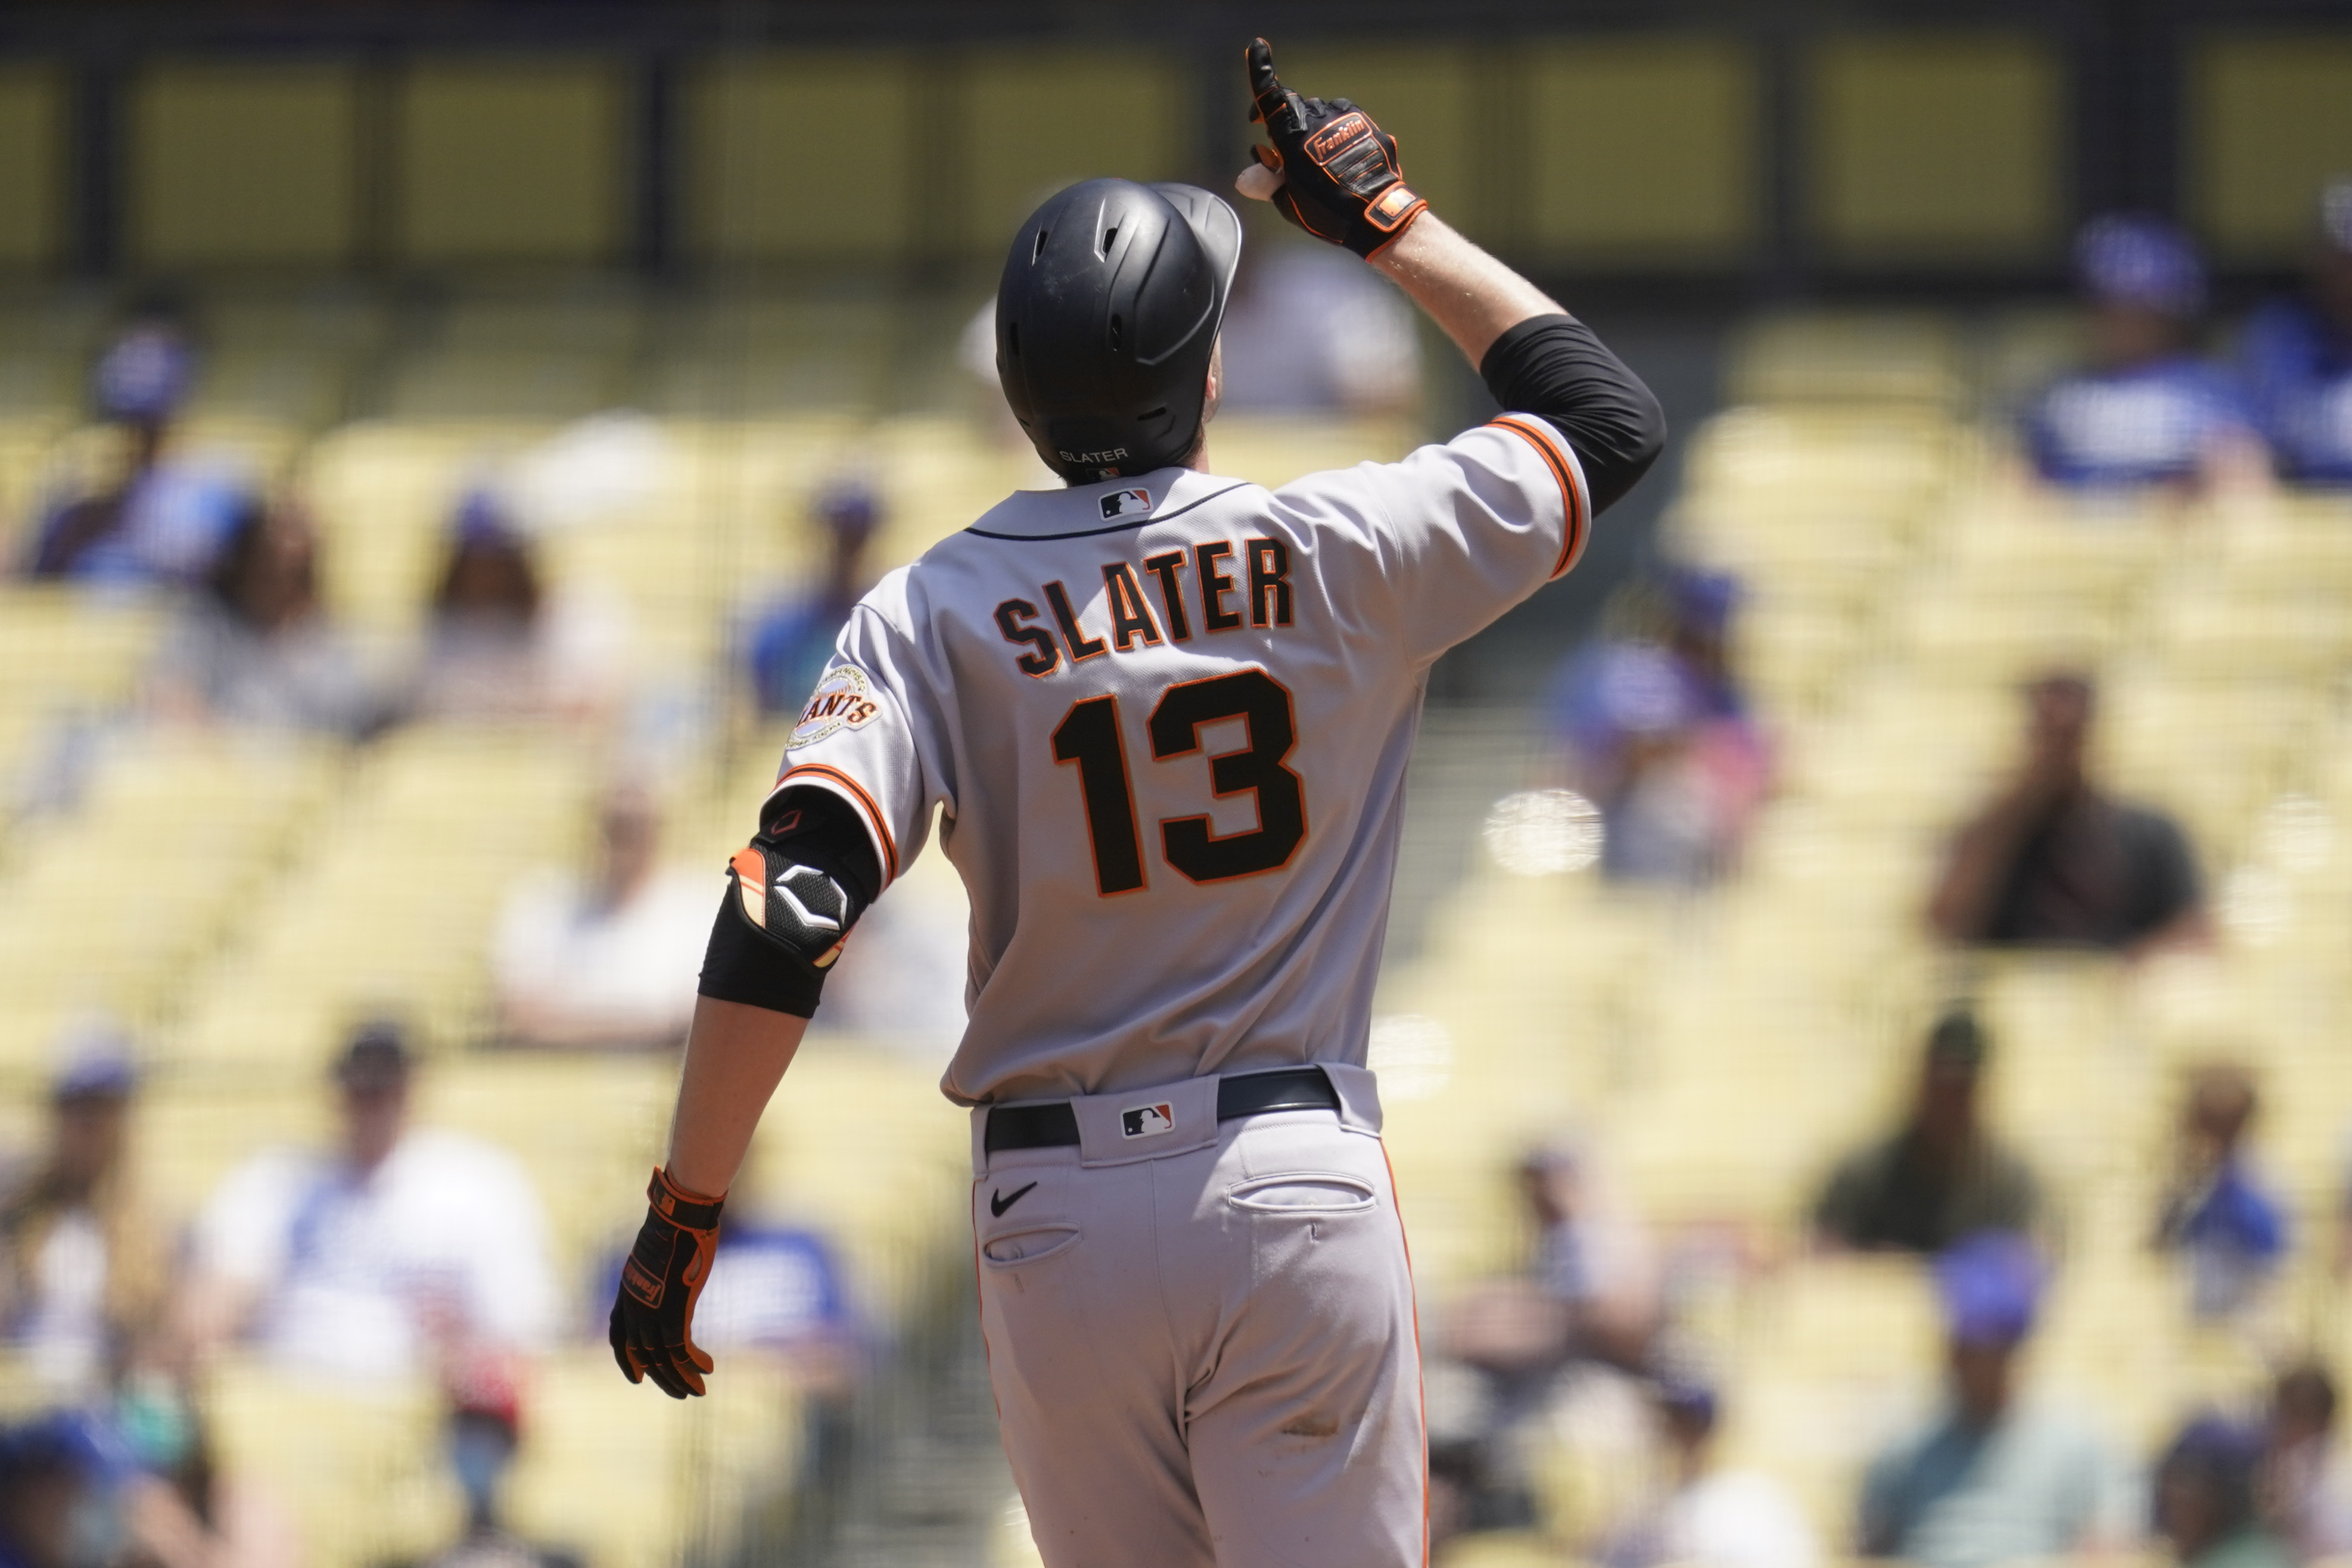 Austin Slater's game-winning single in 10th lifts Giants past Astros 4-3